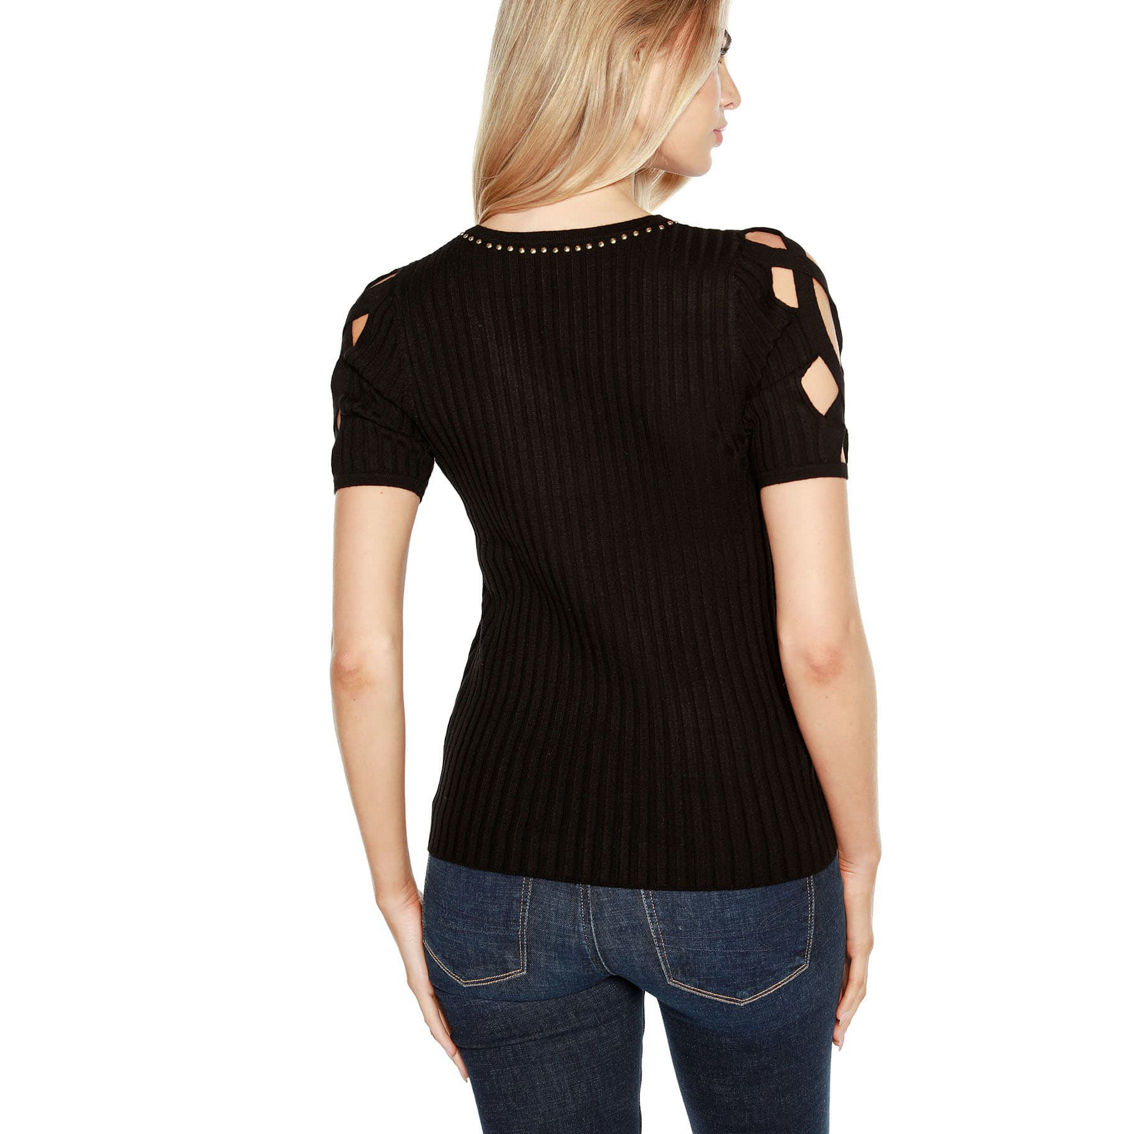 Belldini Black Label Embellished Criss Cross Sleeve Sweater - Image 2 of 4